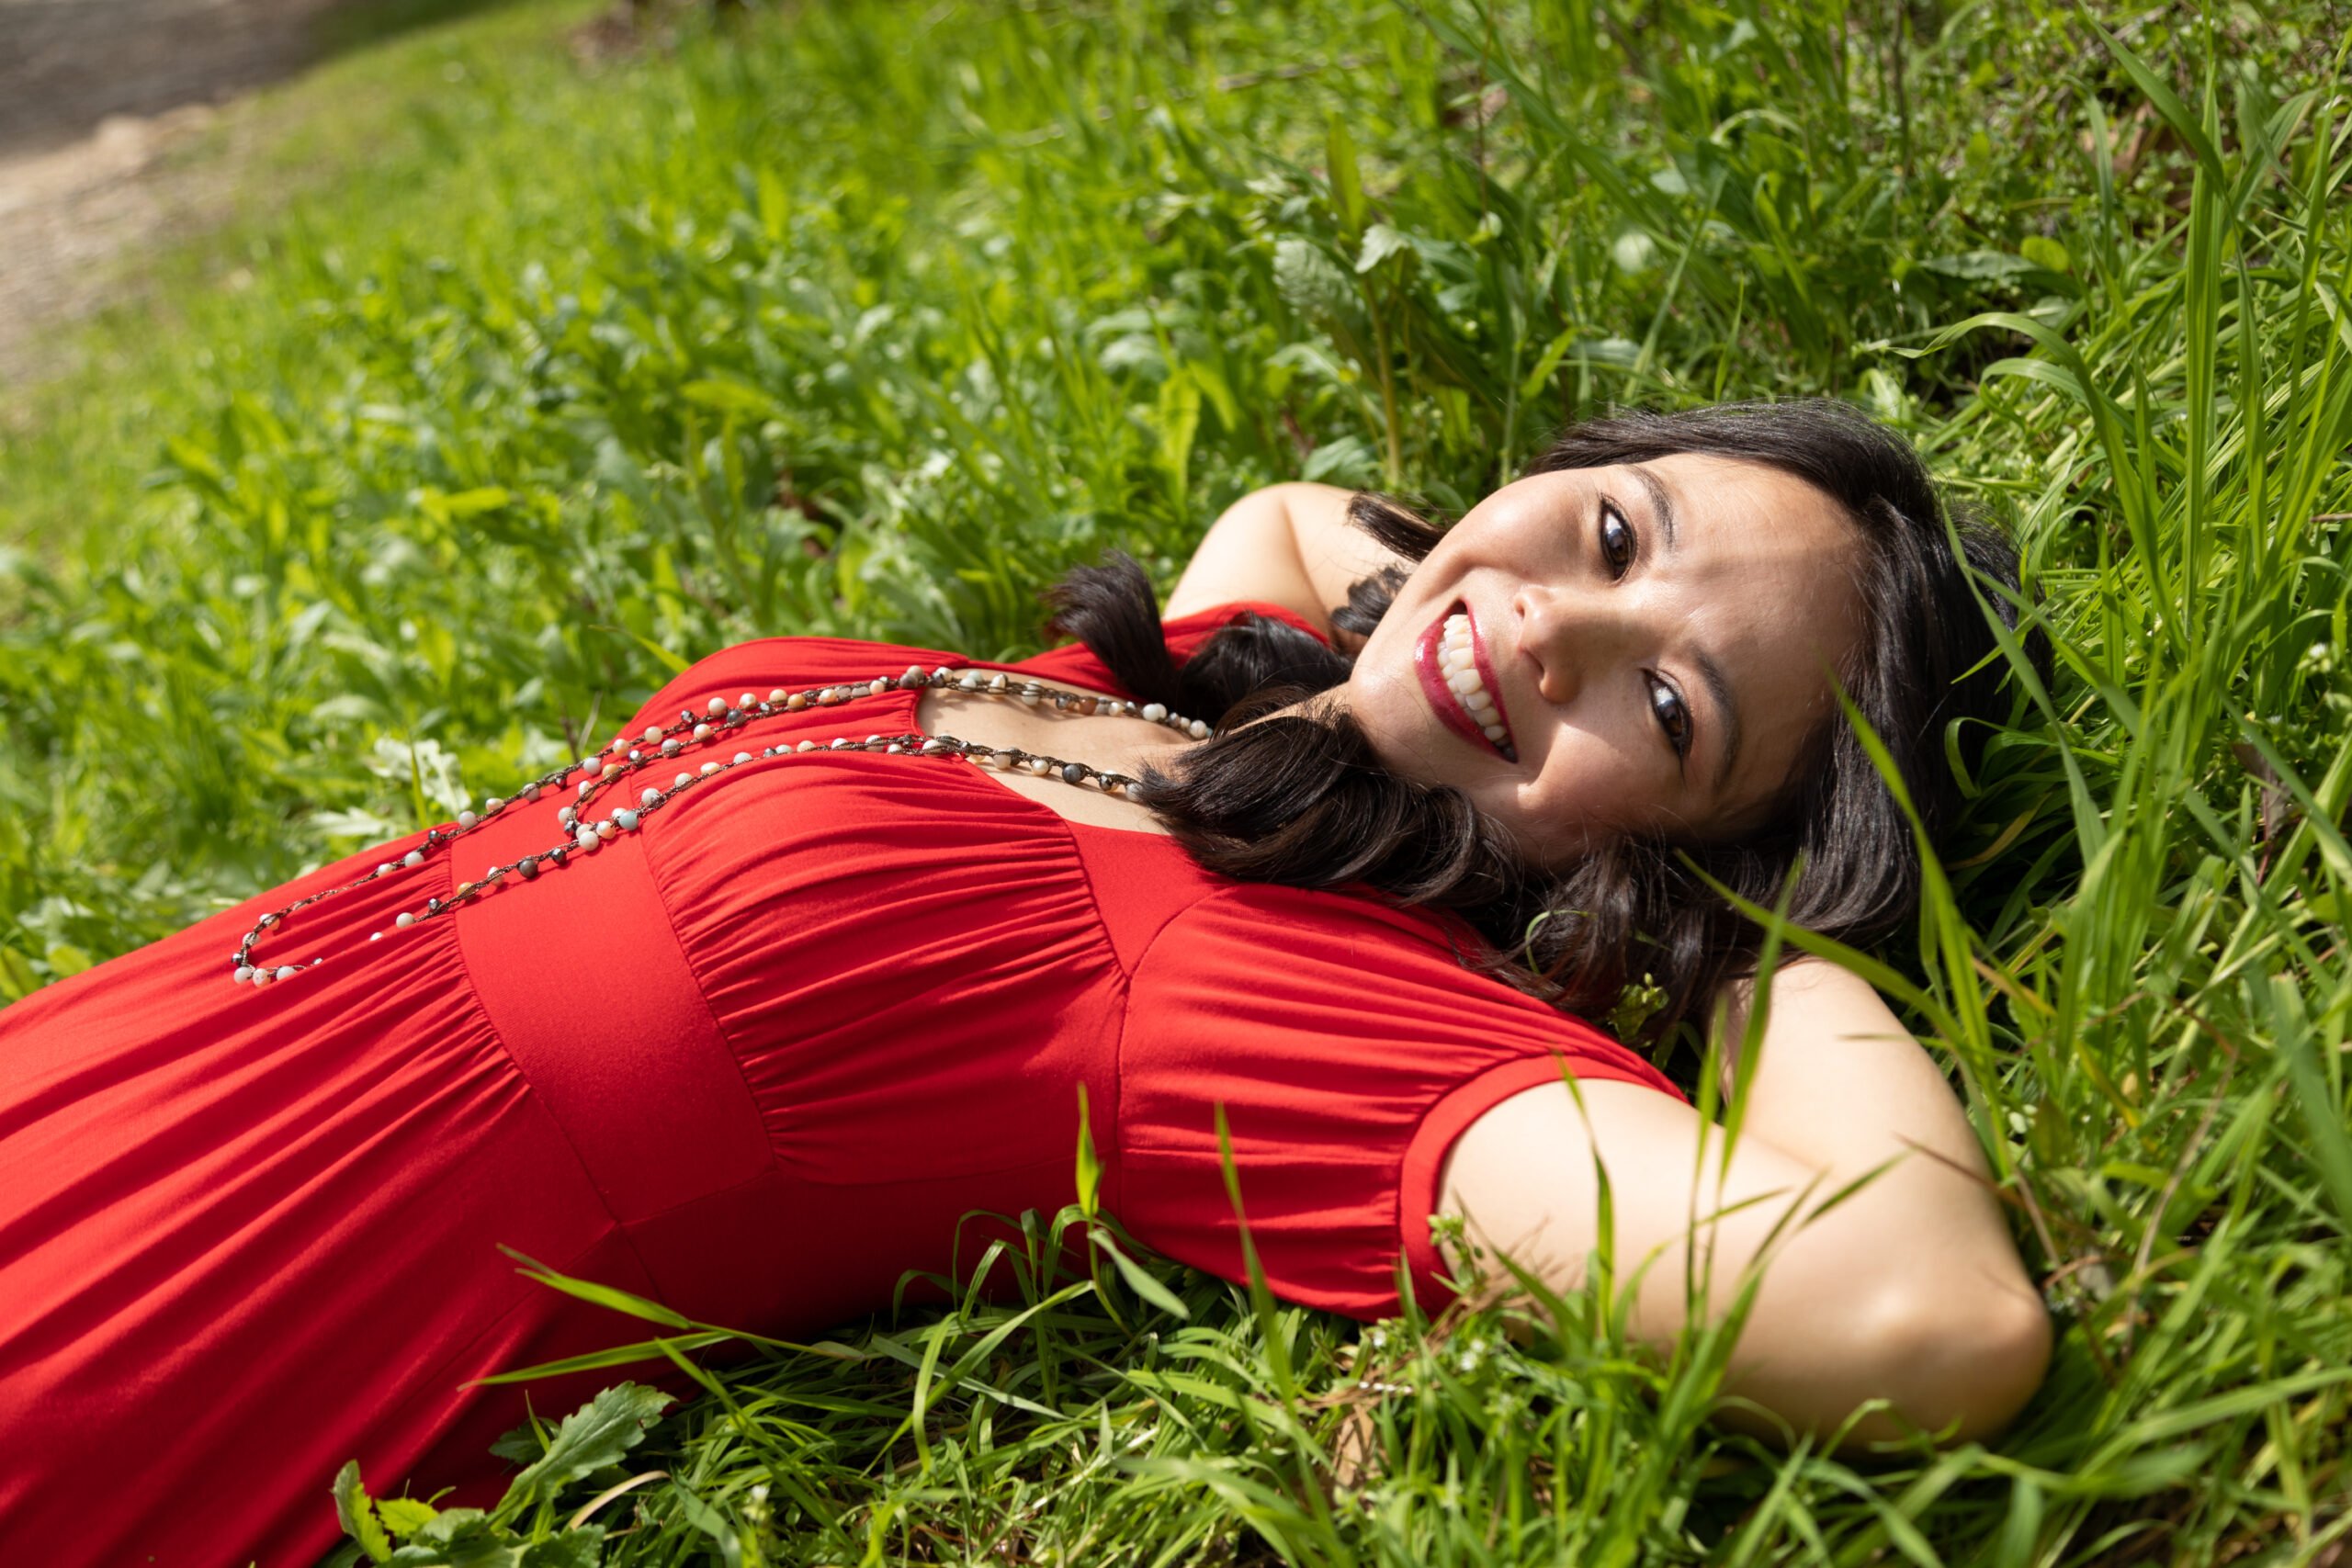 Patrick Heagney's portrait of Dr. Arlene Dijamco, laying on the grass in a red dress